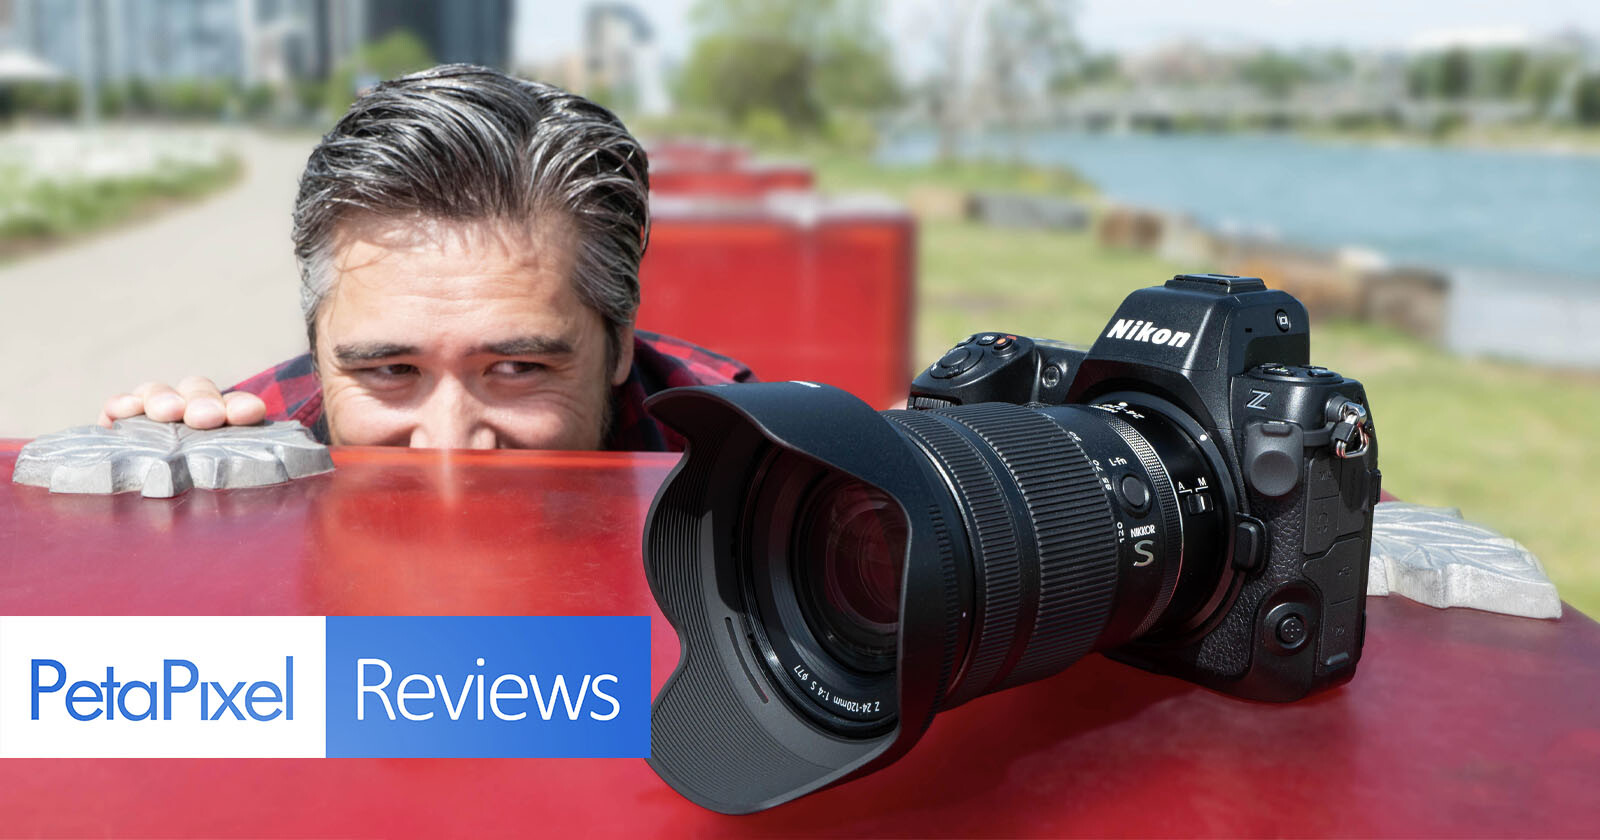 Nikon Z8 Review: The Best Camera for Most Serious Photographers